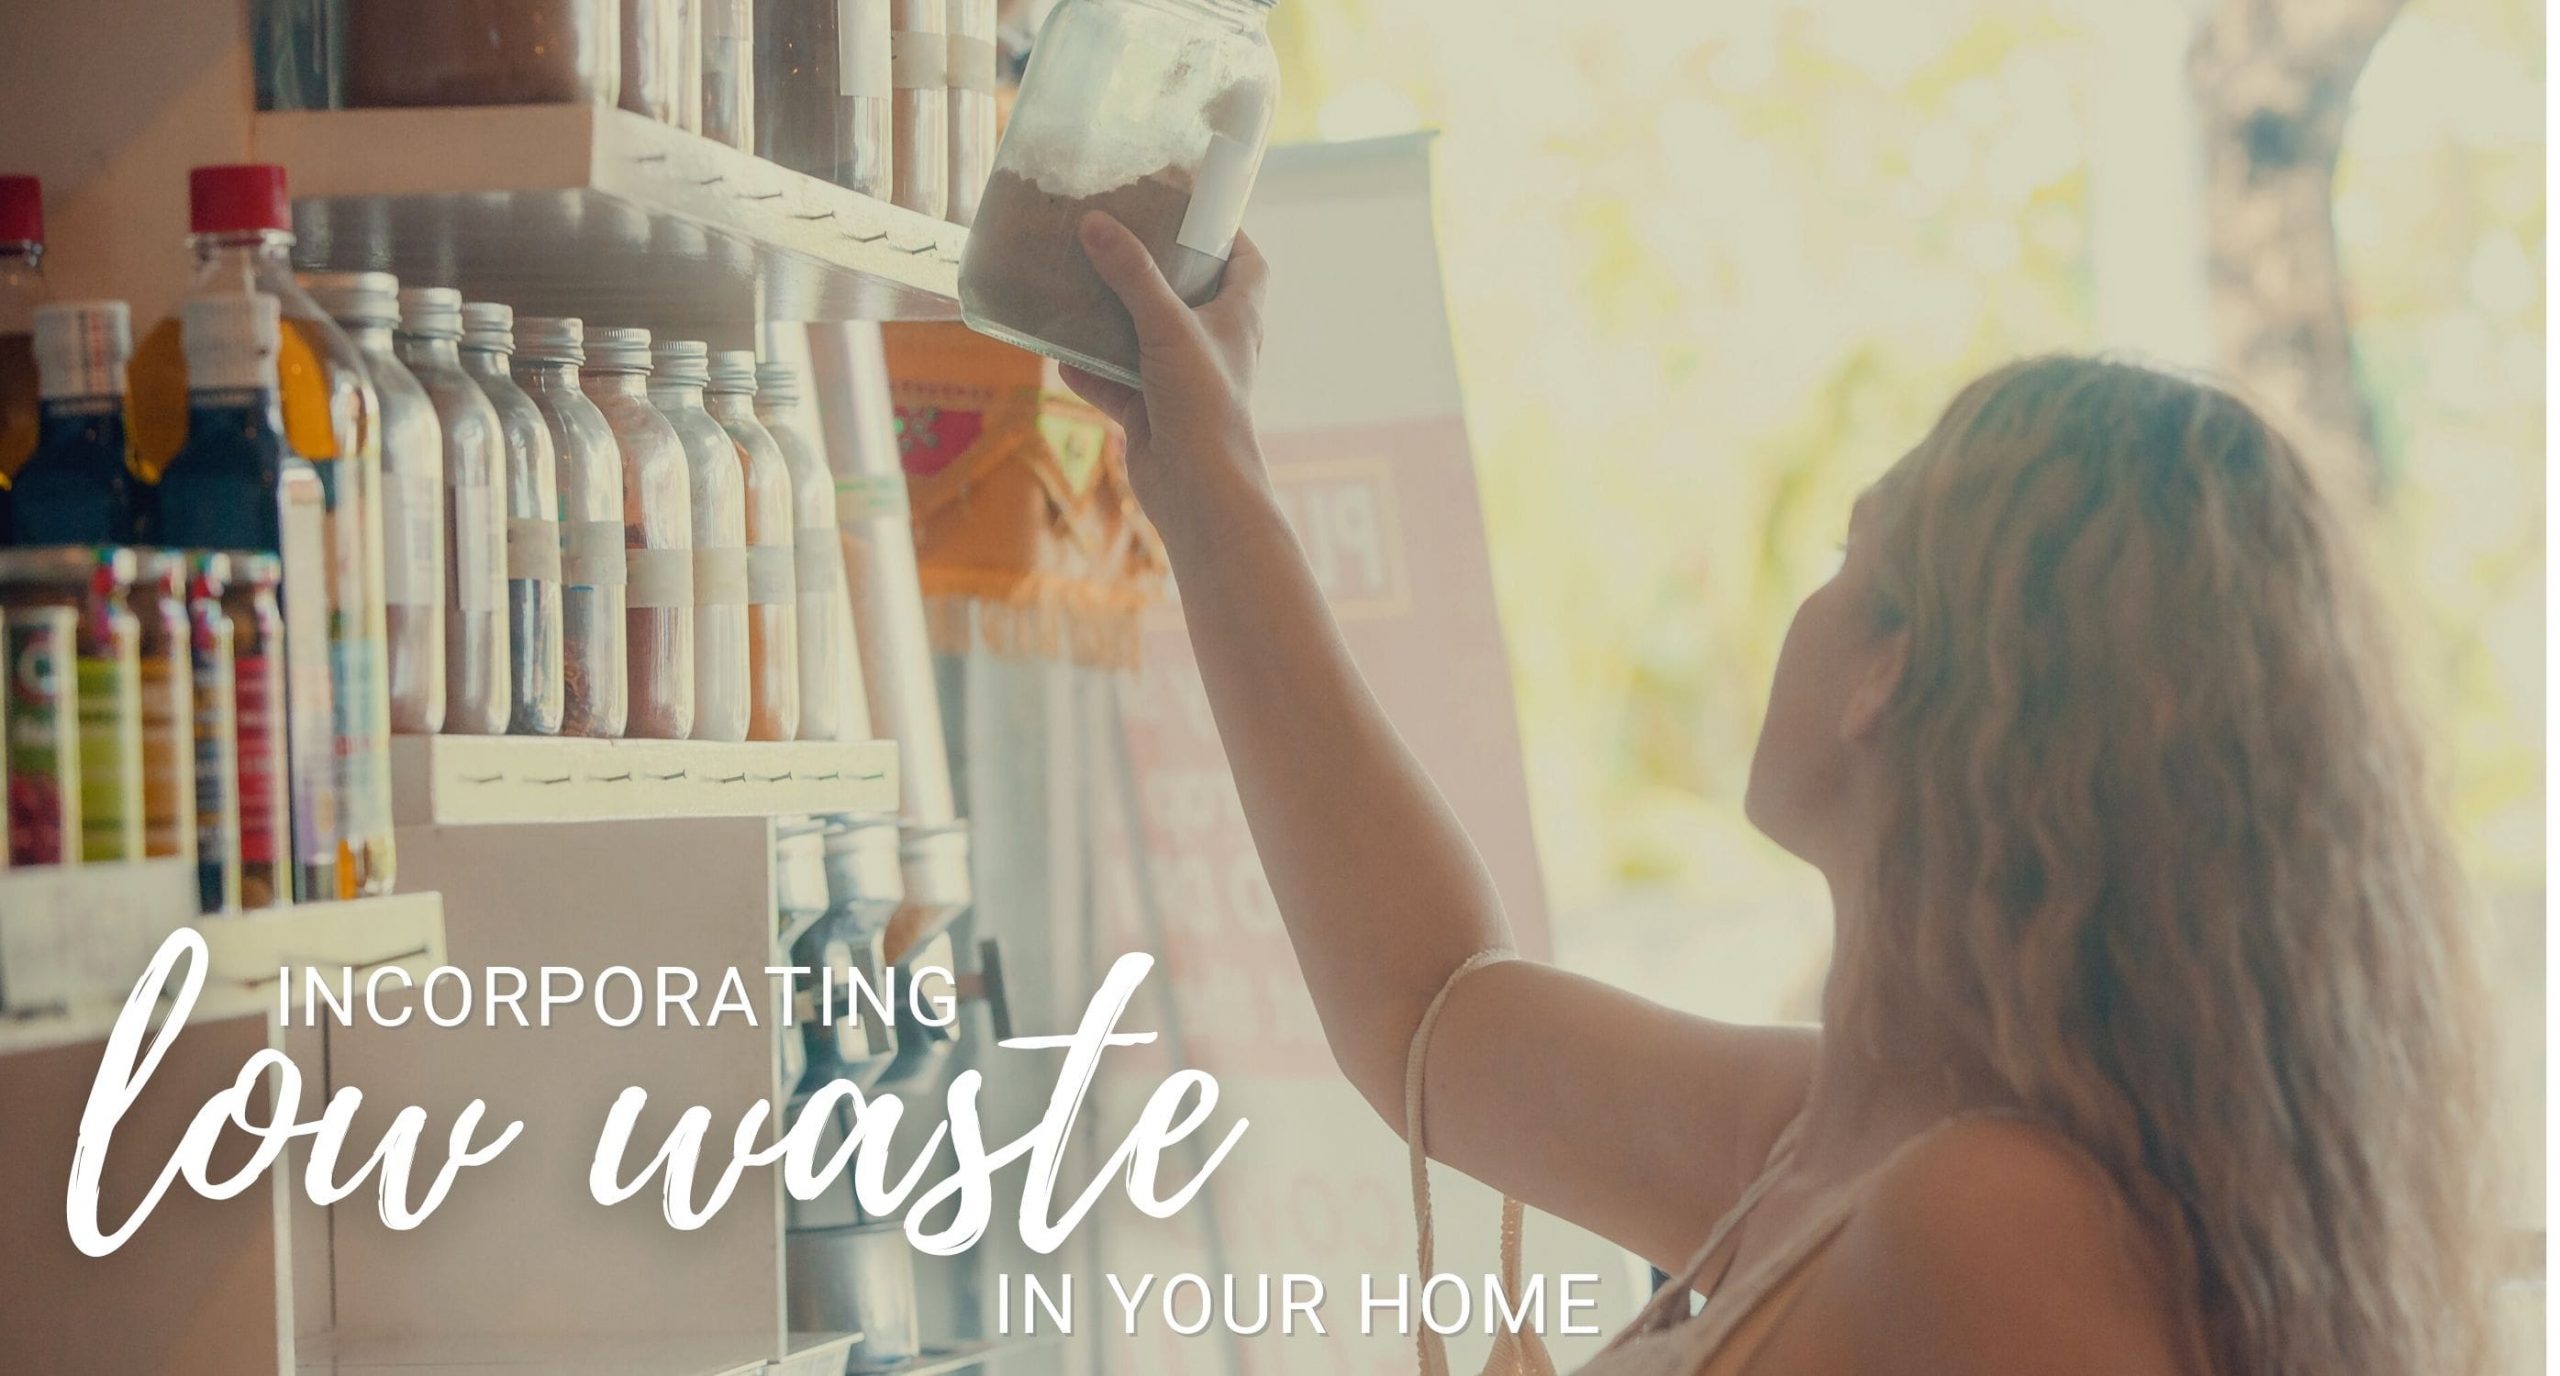 Shopping Woman to Low Waste at Home